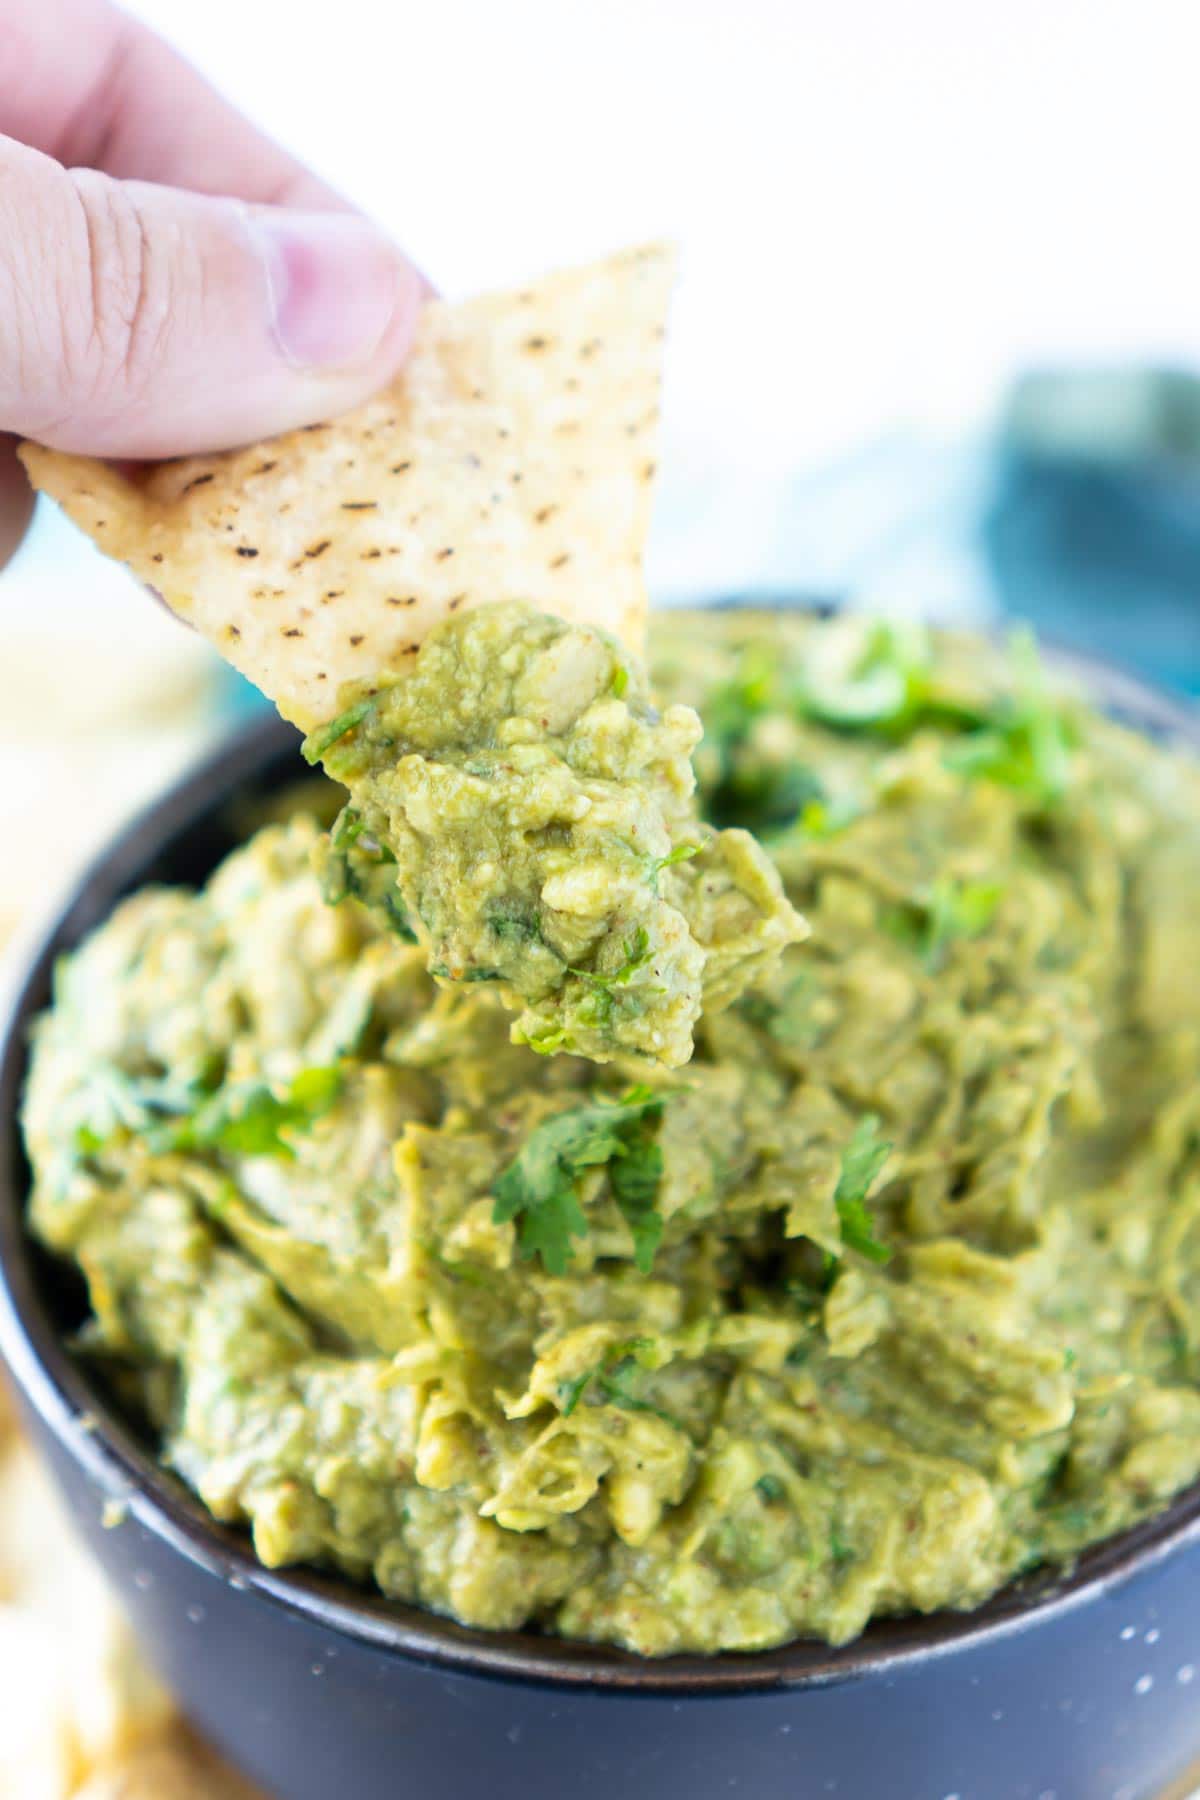 Woman's hand holding a tortilla chip above a bowl of guacamole